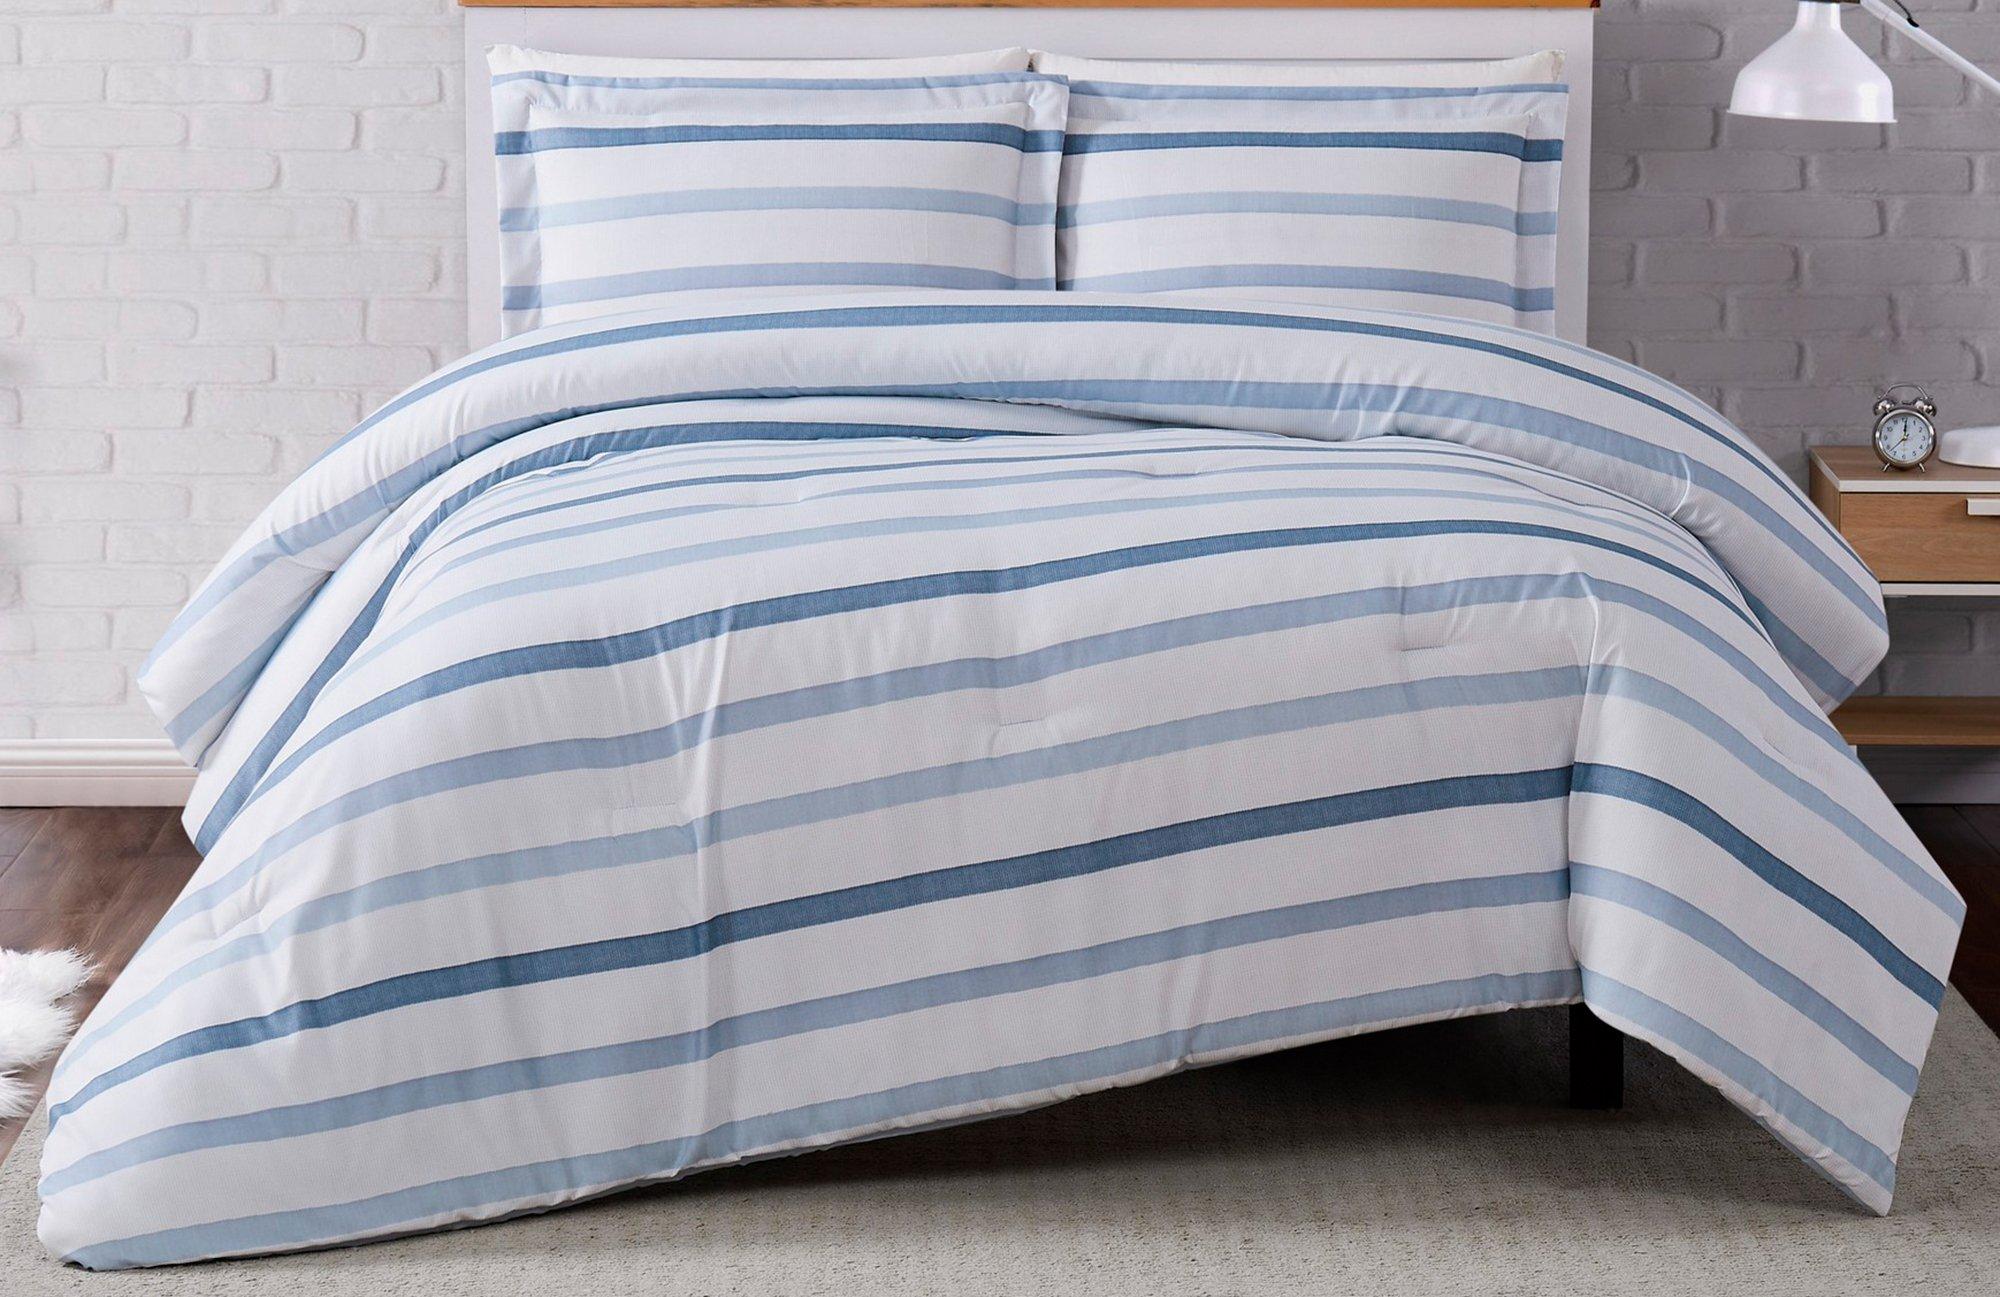 Photos - Bed Linen Truly Soft Waffle Stripe Duvet Cover Set